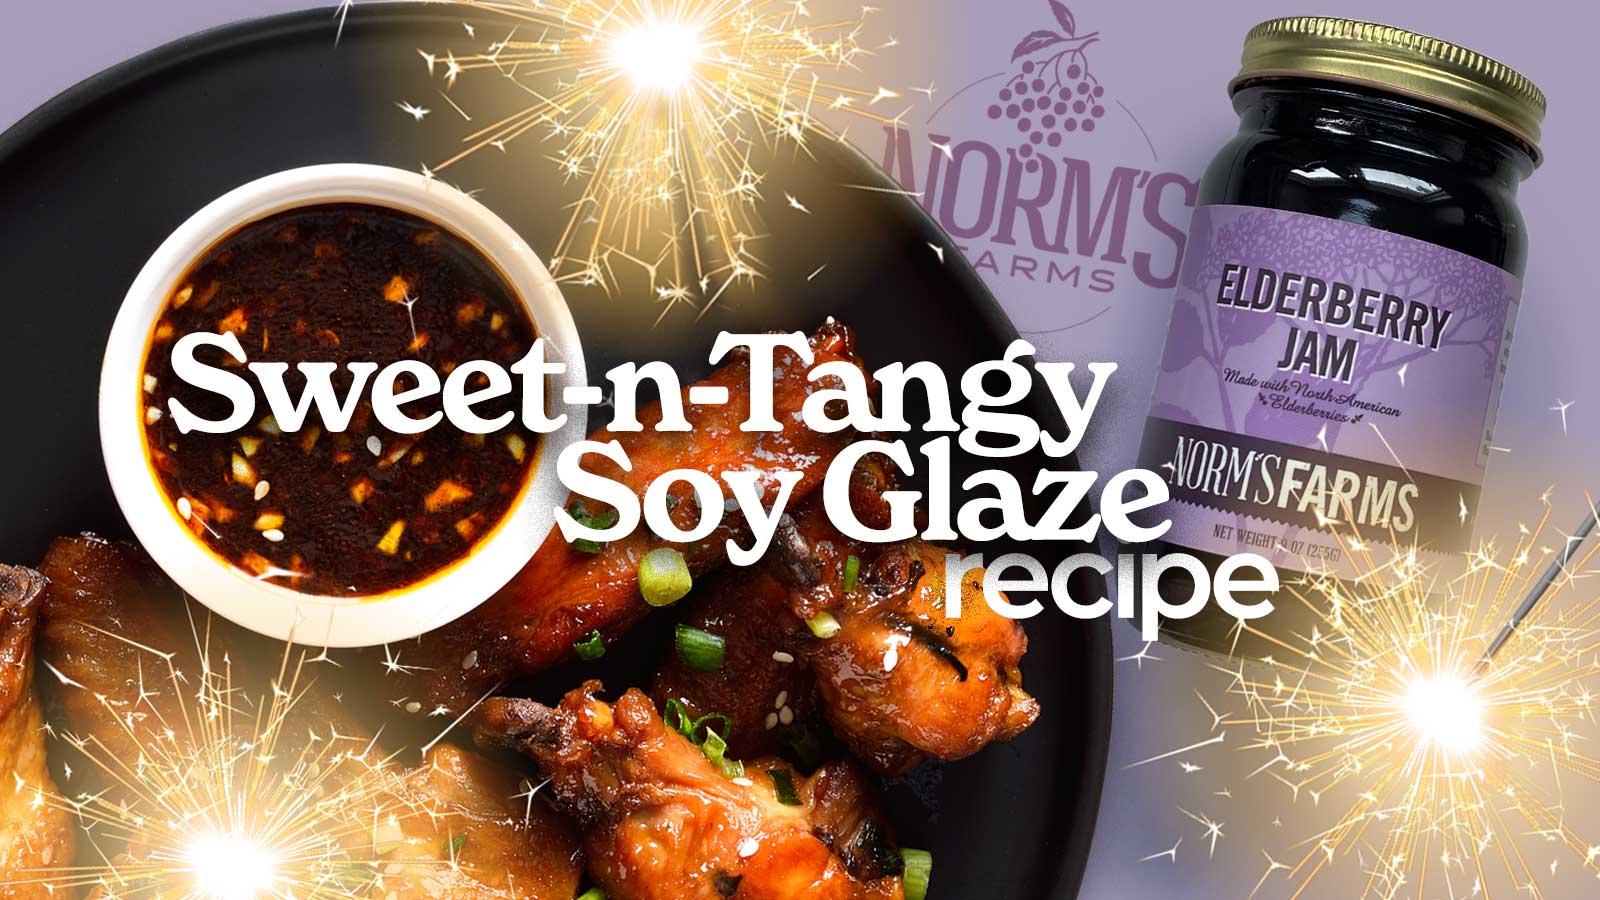 Norm’s Sweet-n-Tangy Soy Glaze